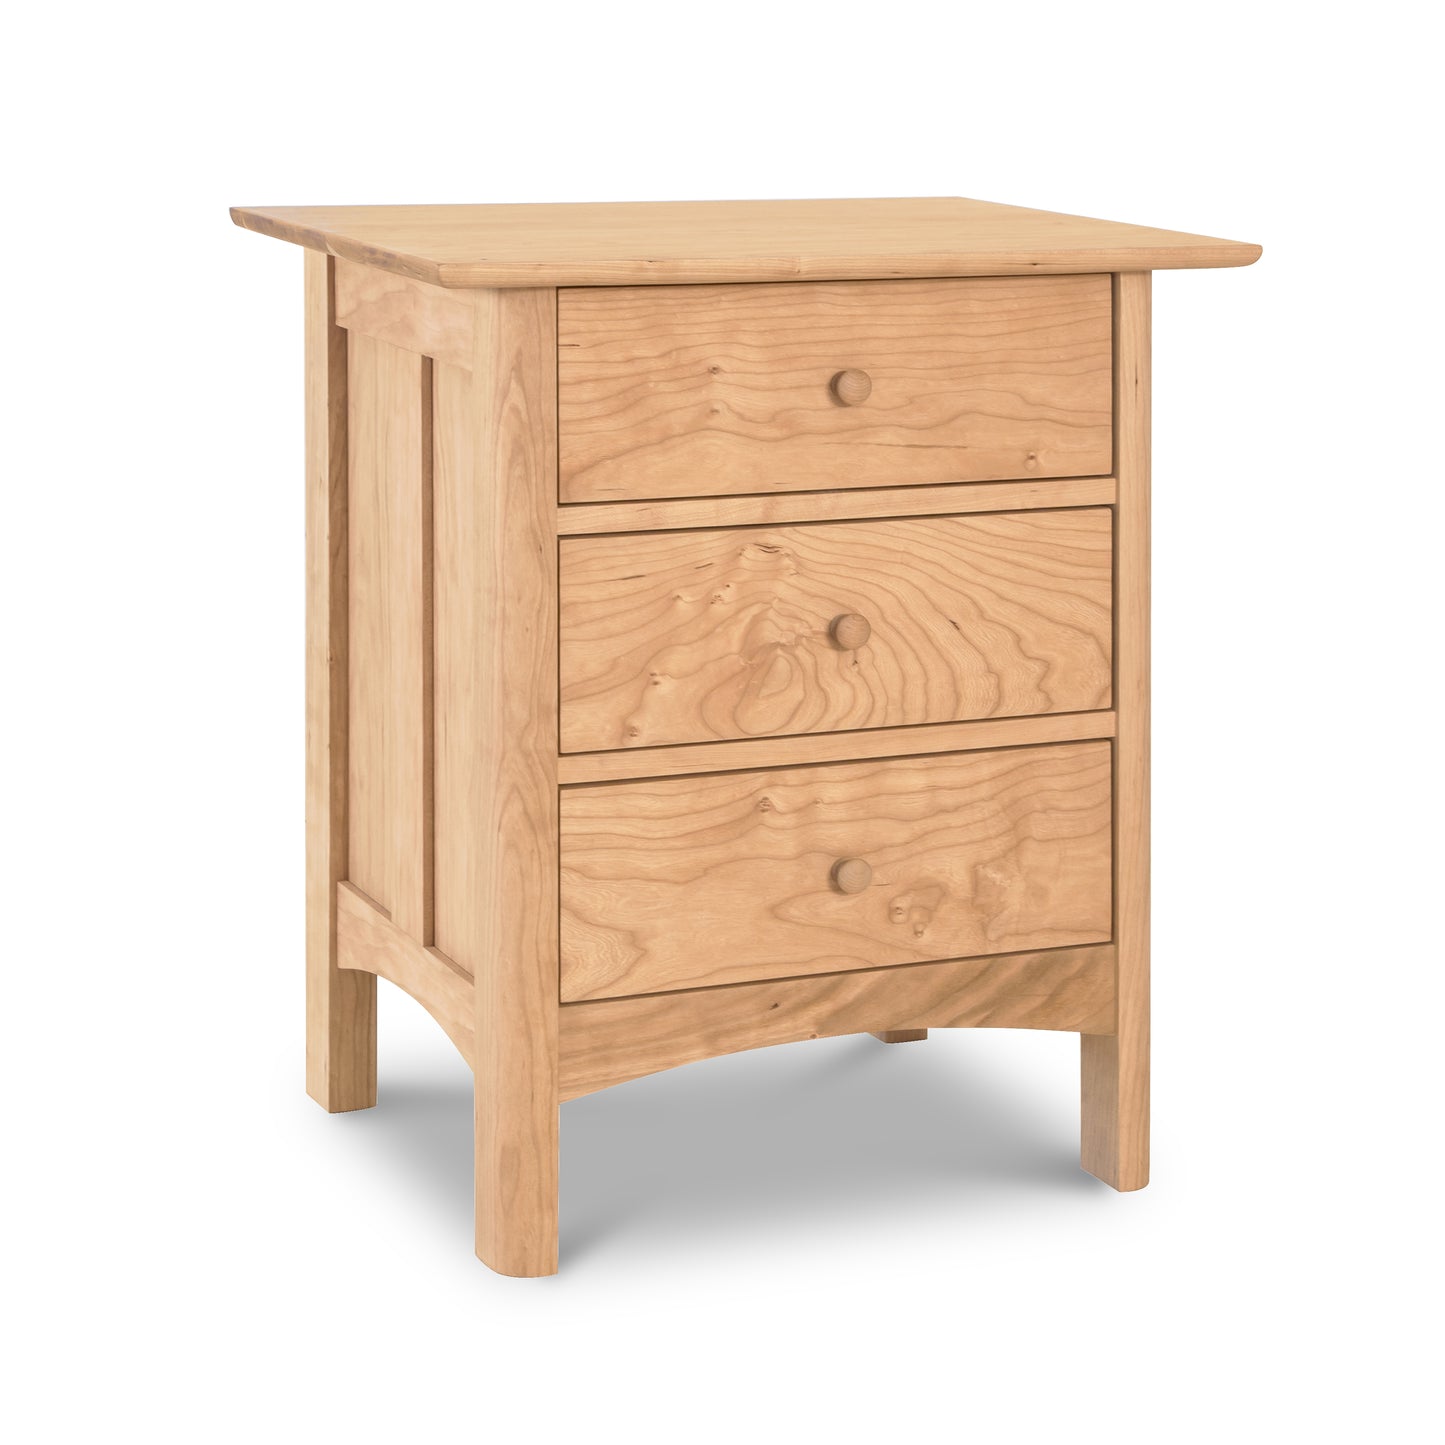 A Vermont Furniture Designs Heartwood Shaker 3-Drawer nightstand crafted from luxury wood with three drawers.